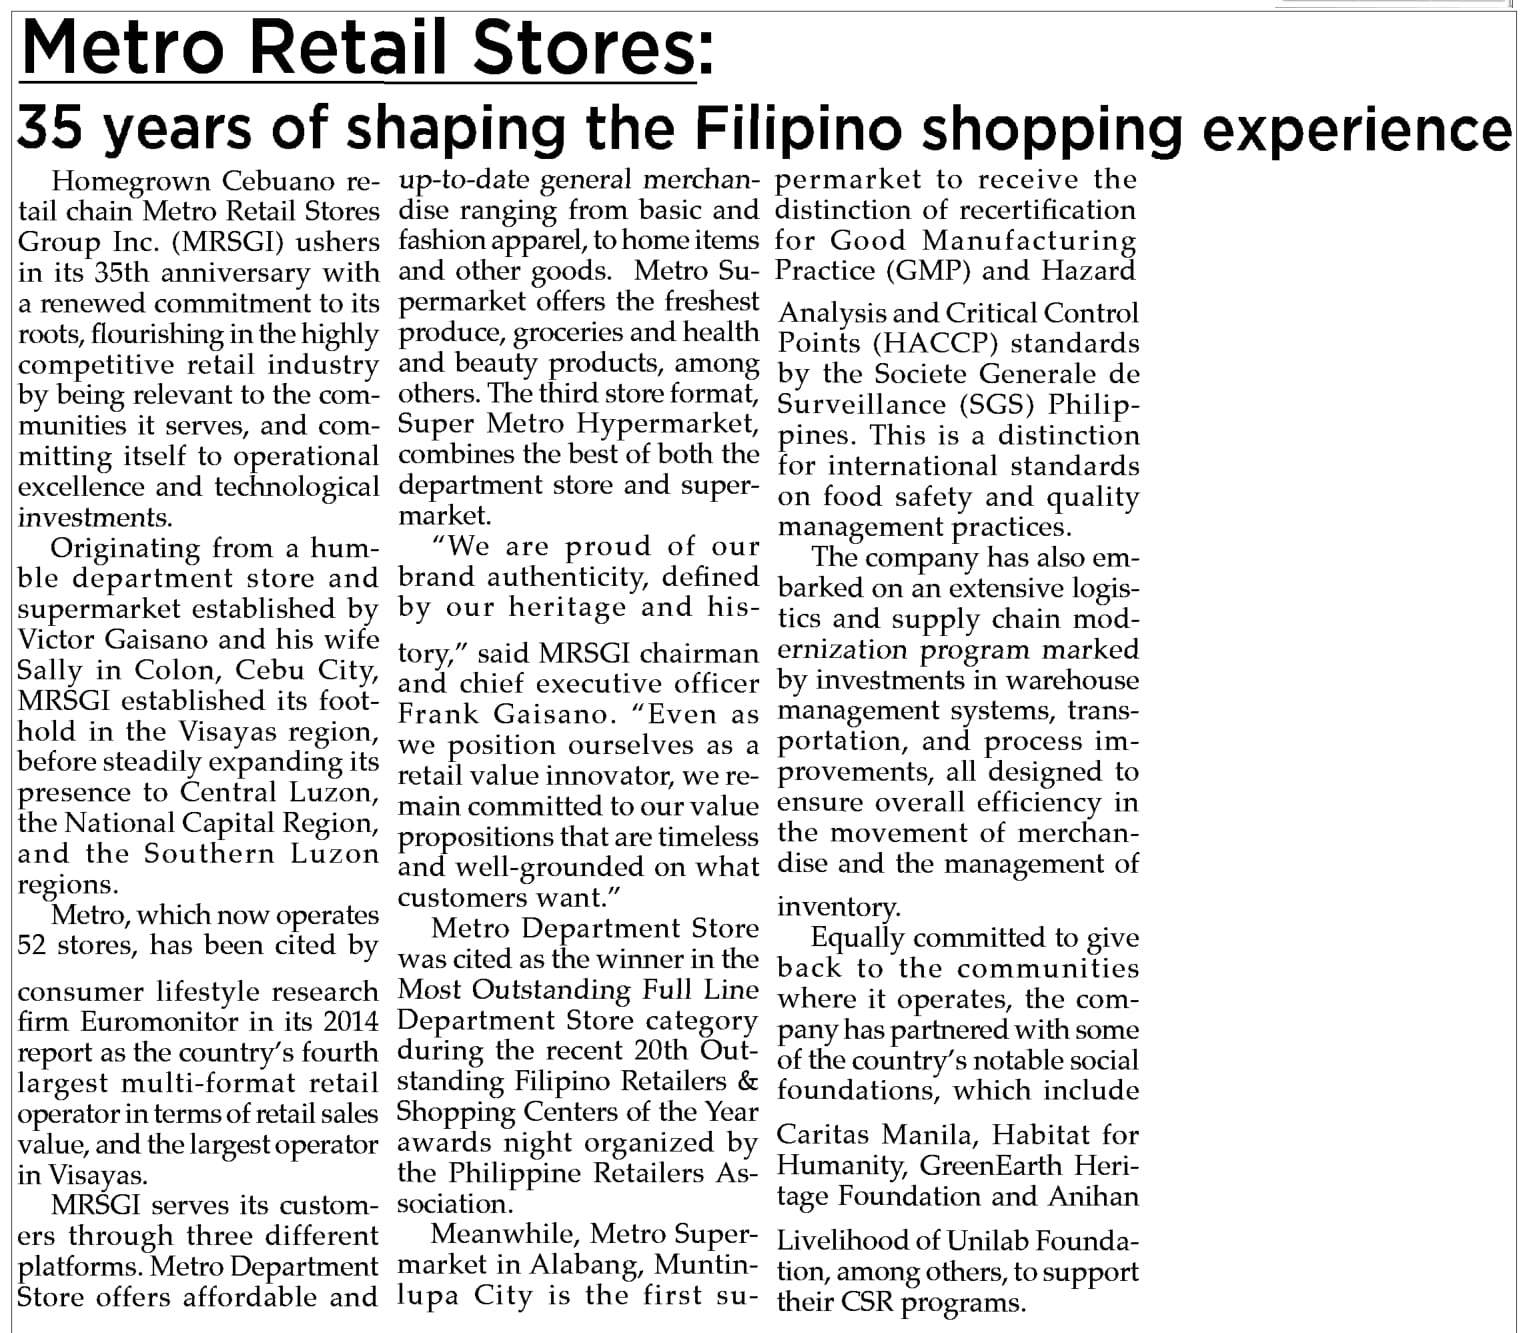 Metro Retail Stores 35 years of shaping the Filipino shopping experience